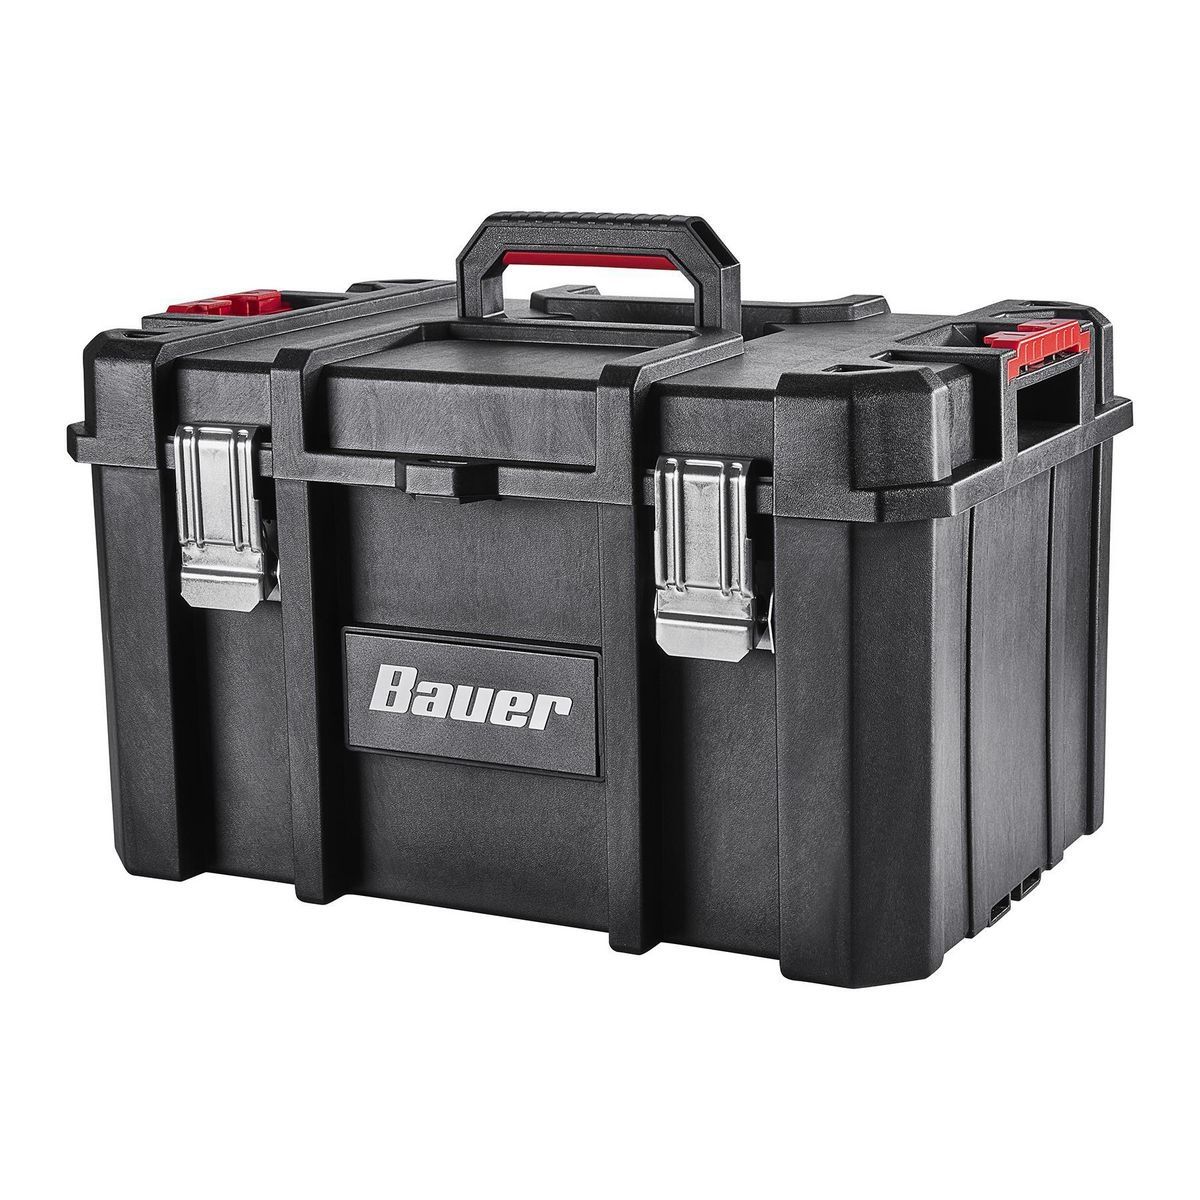 Large Modular Toolbox on Sale At Harbor Freight Tools